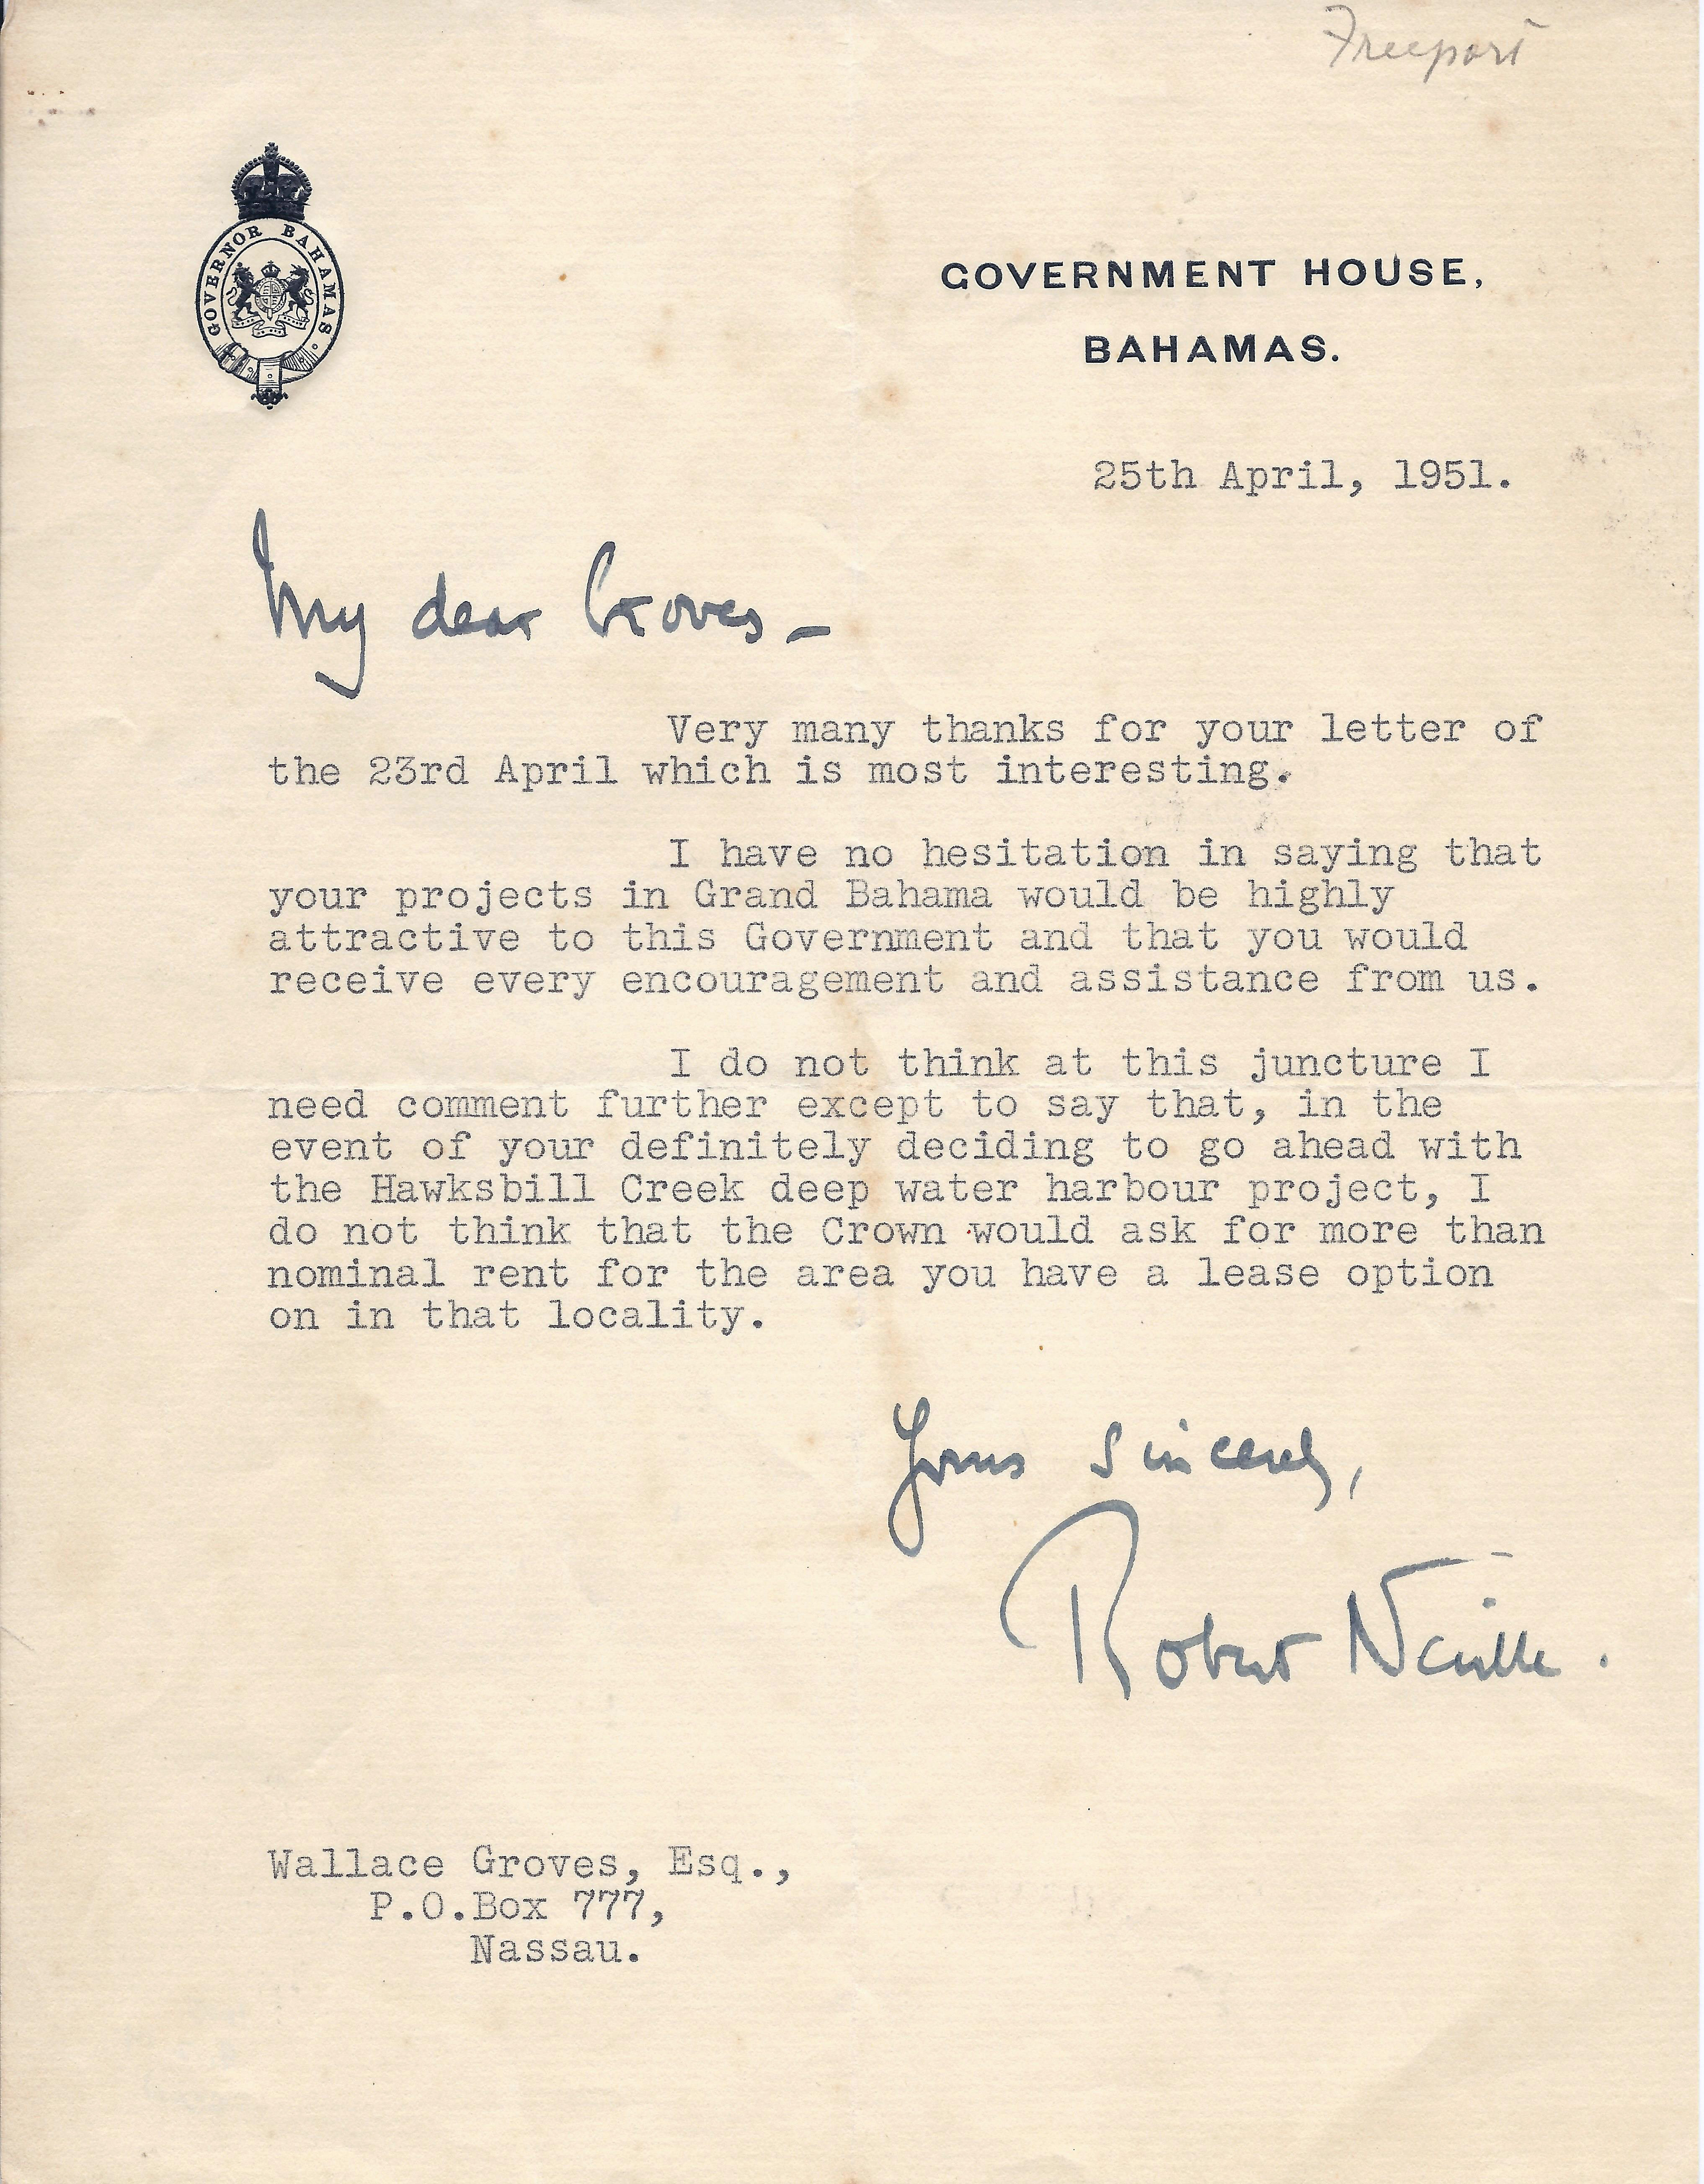 Letter from Sir Robert Neville to Wallace Groves about Freeport project, 1951